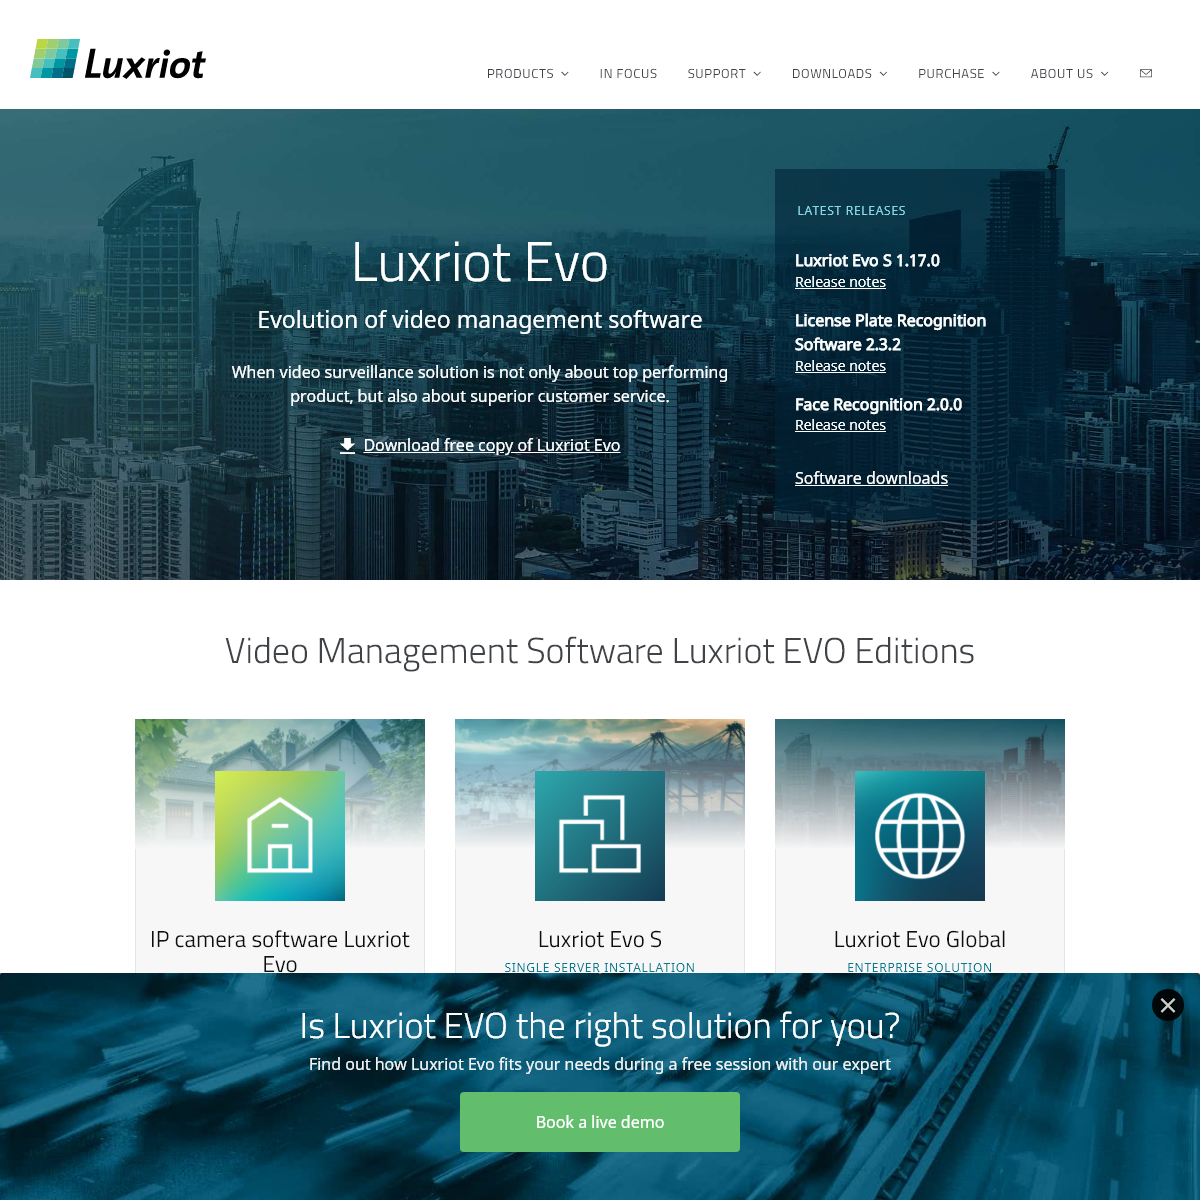 A complete backup of luxriot.com